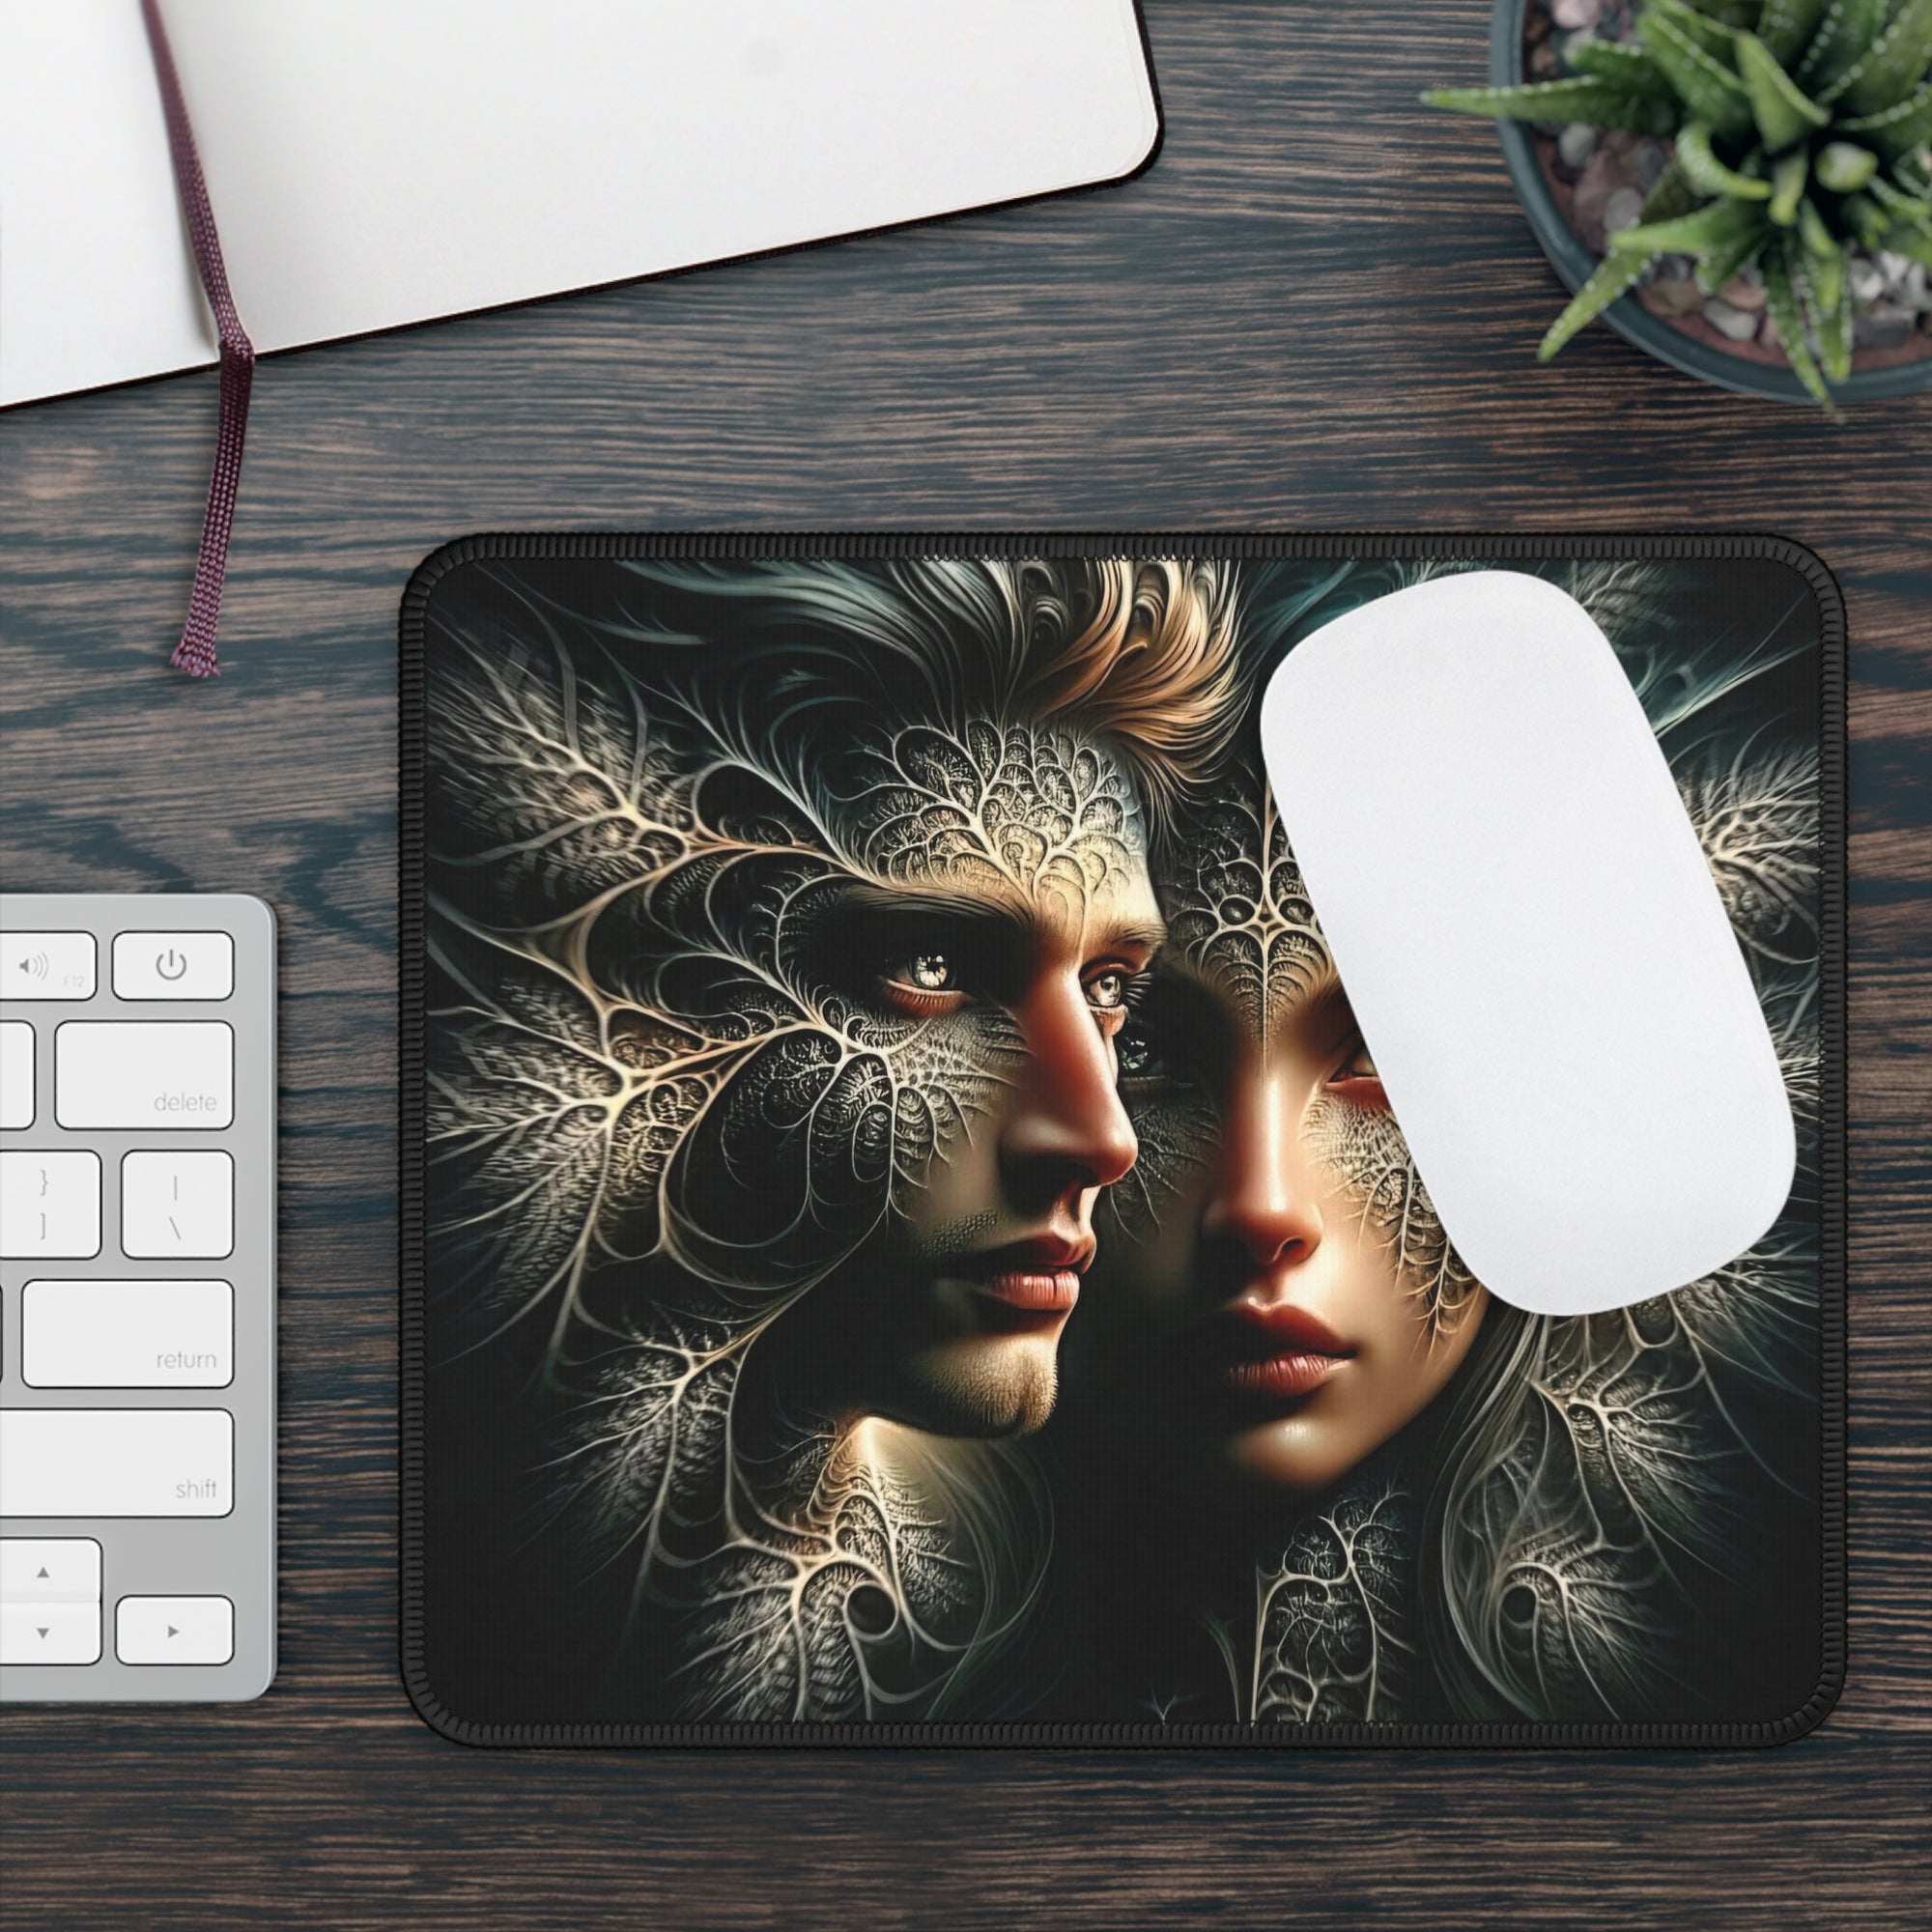 Mirrored Souls Gaming Mouse Pad